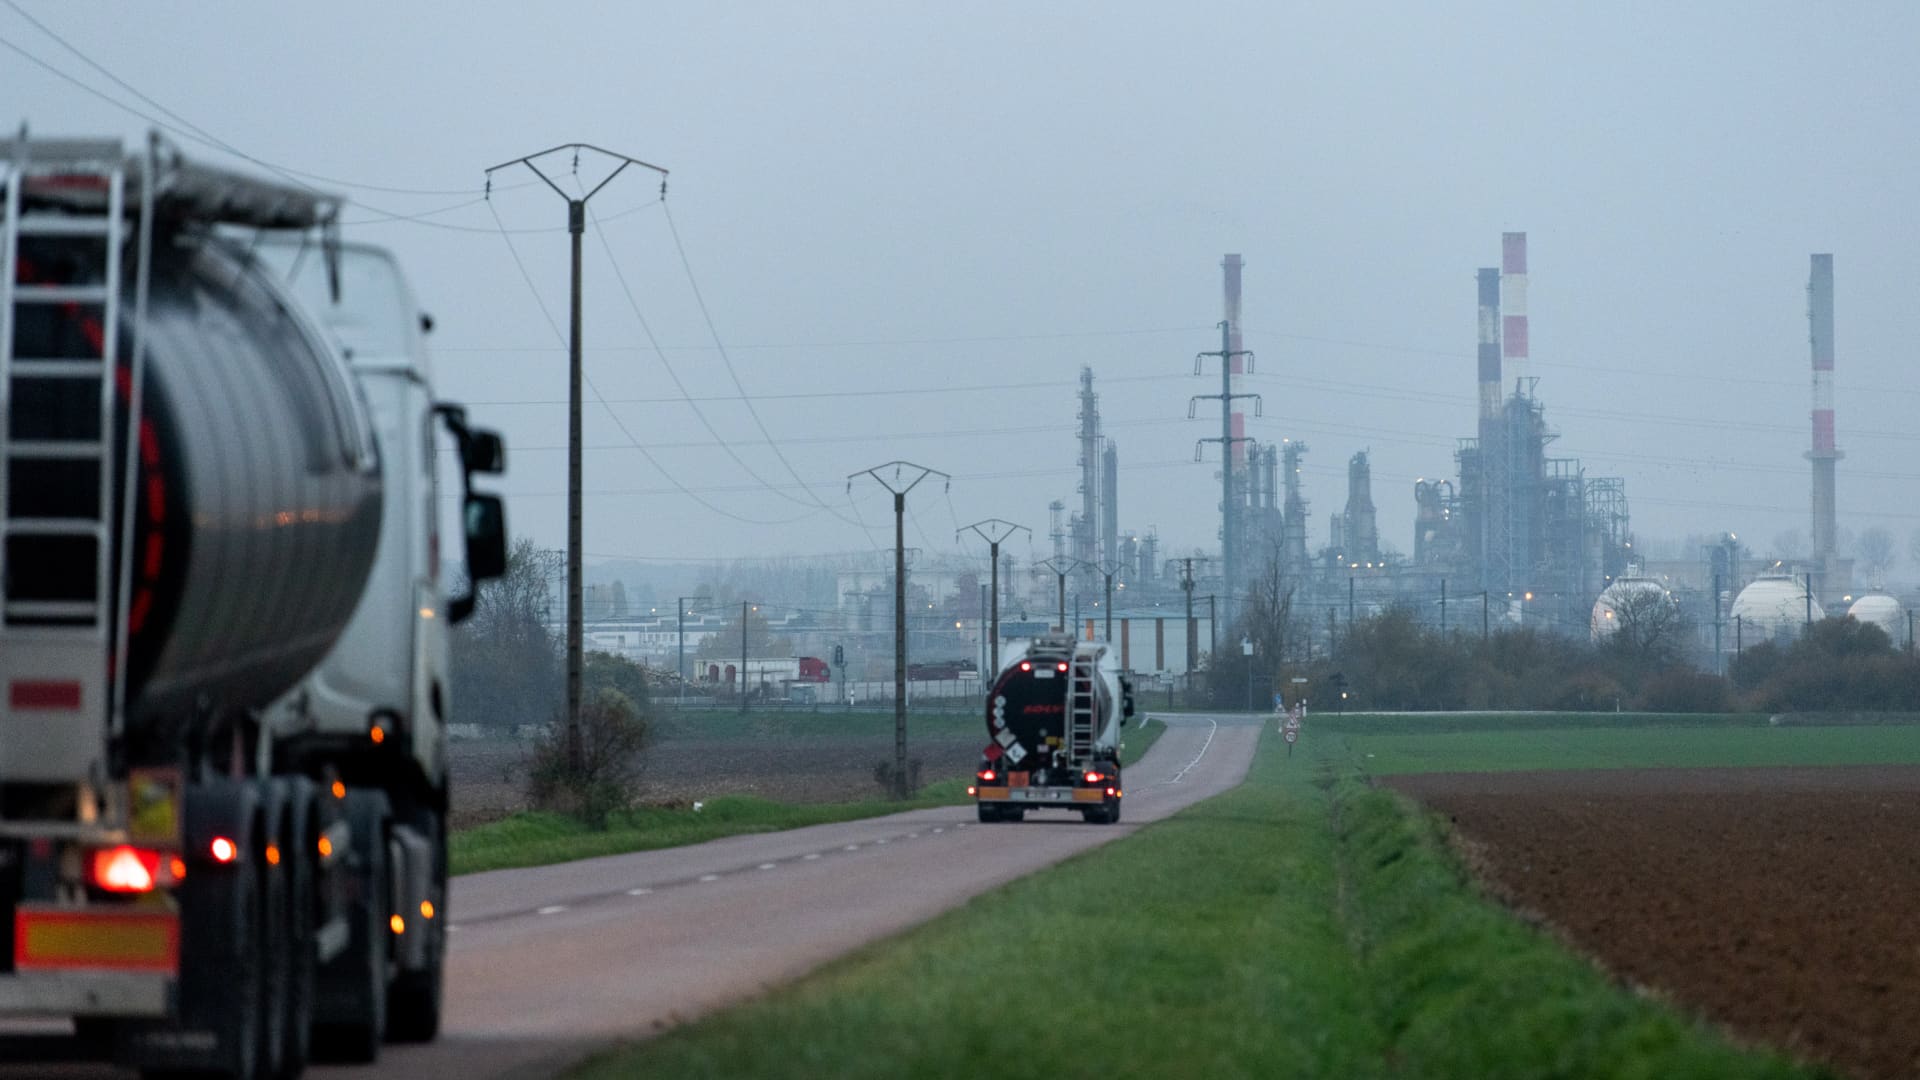 European countries have been scrambling to find alternative sources of oil and gas following Russia's full-scale invasion of Ukraine in Feb. 2021.